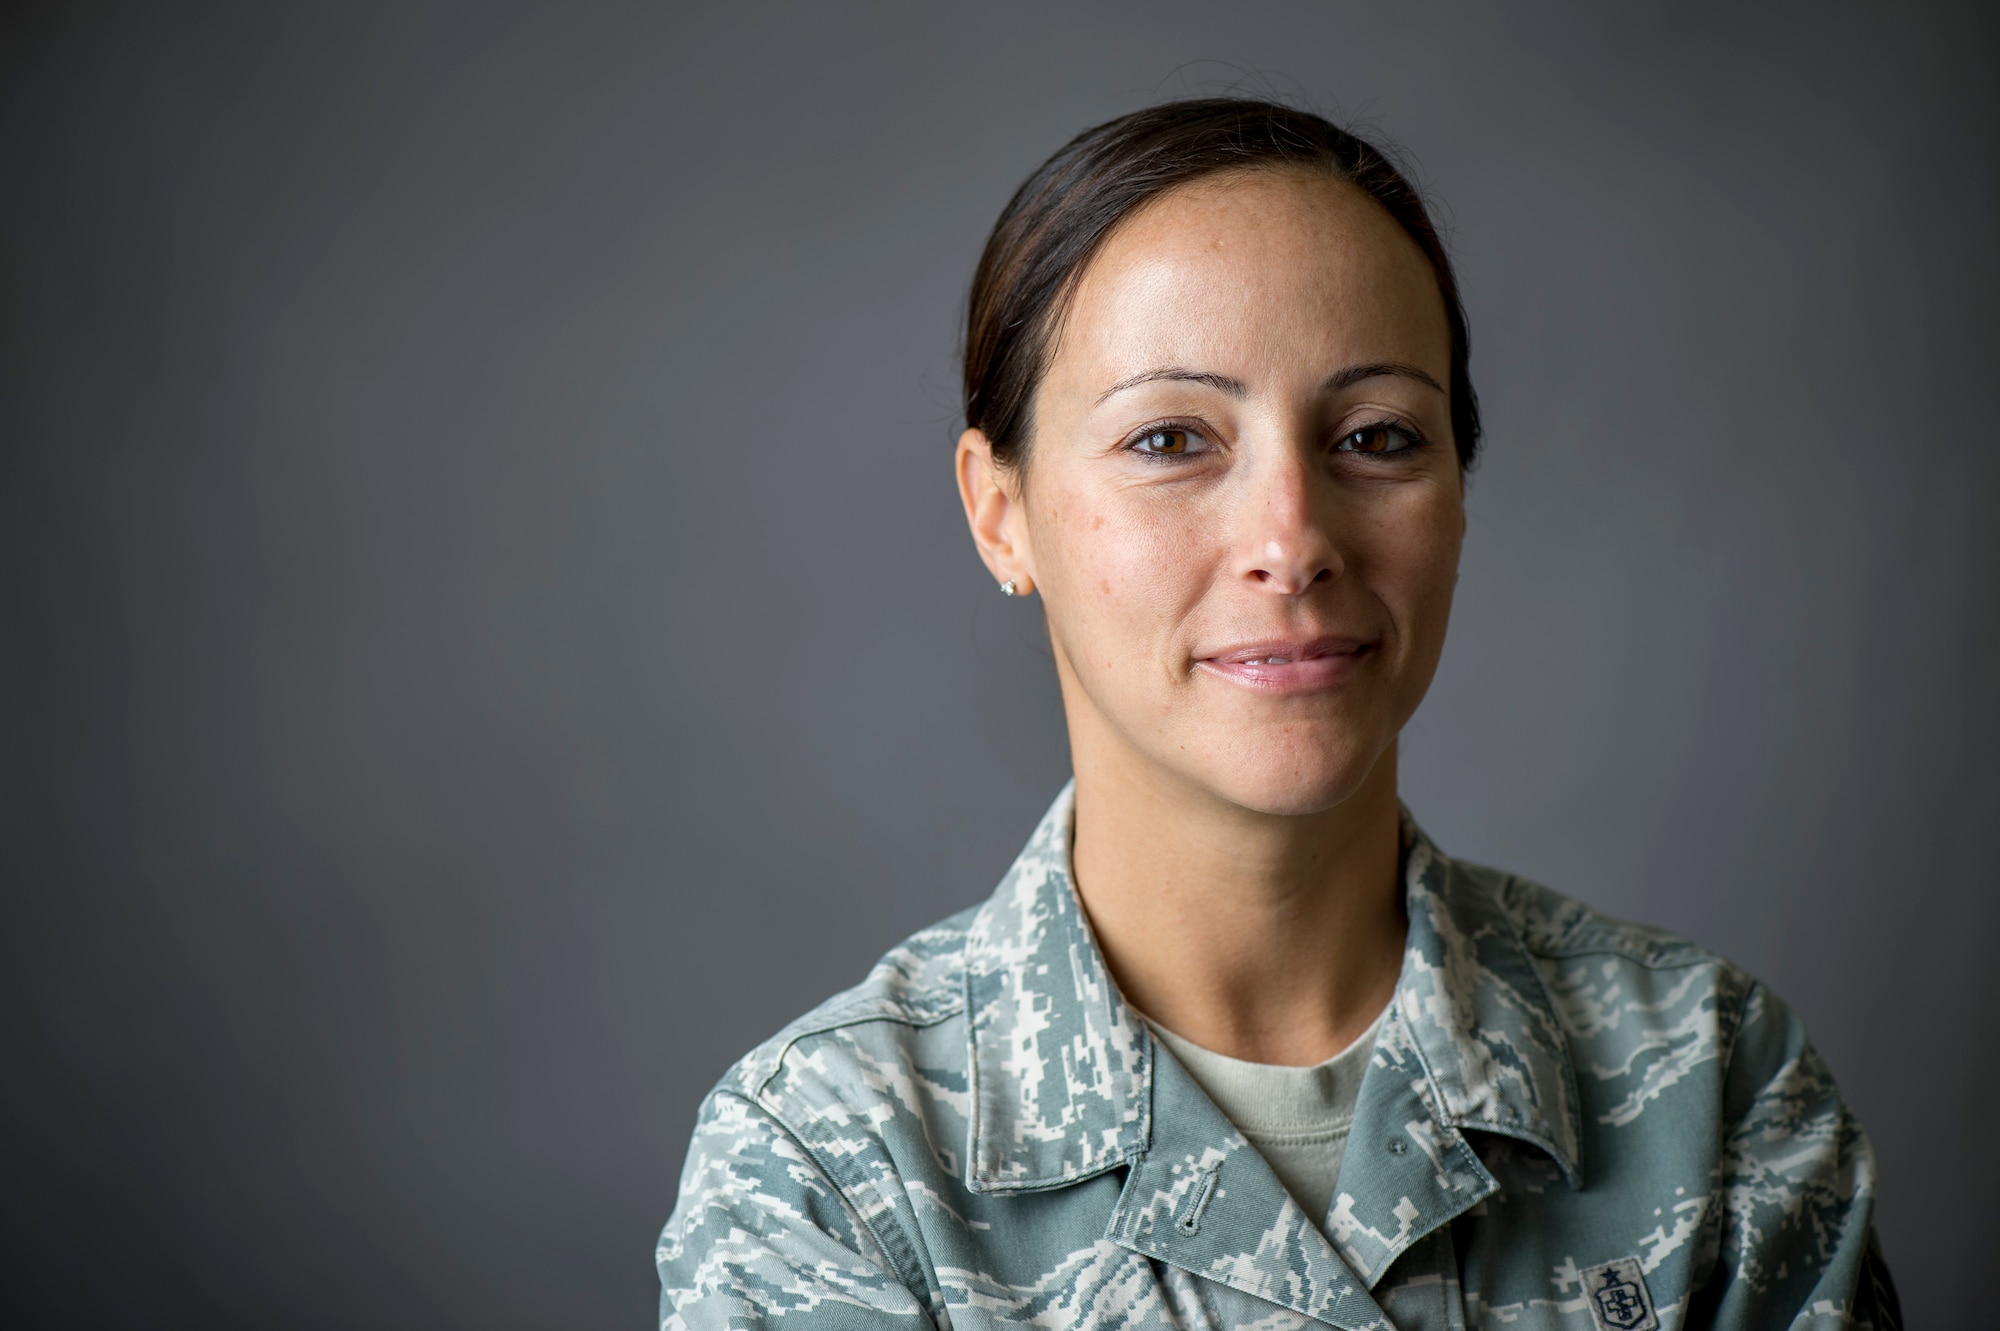 Deployed photo of Tech. Sgt. Linda Ochs. (U.S. Air Force photo by Staff Sgt. Jeremy Bowcock)